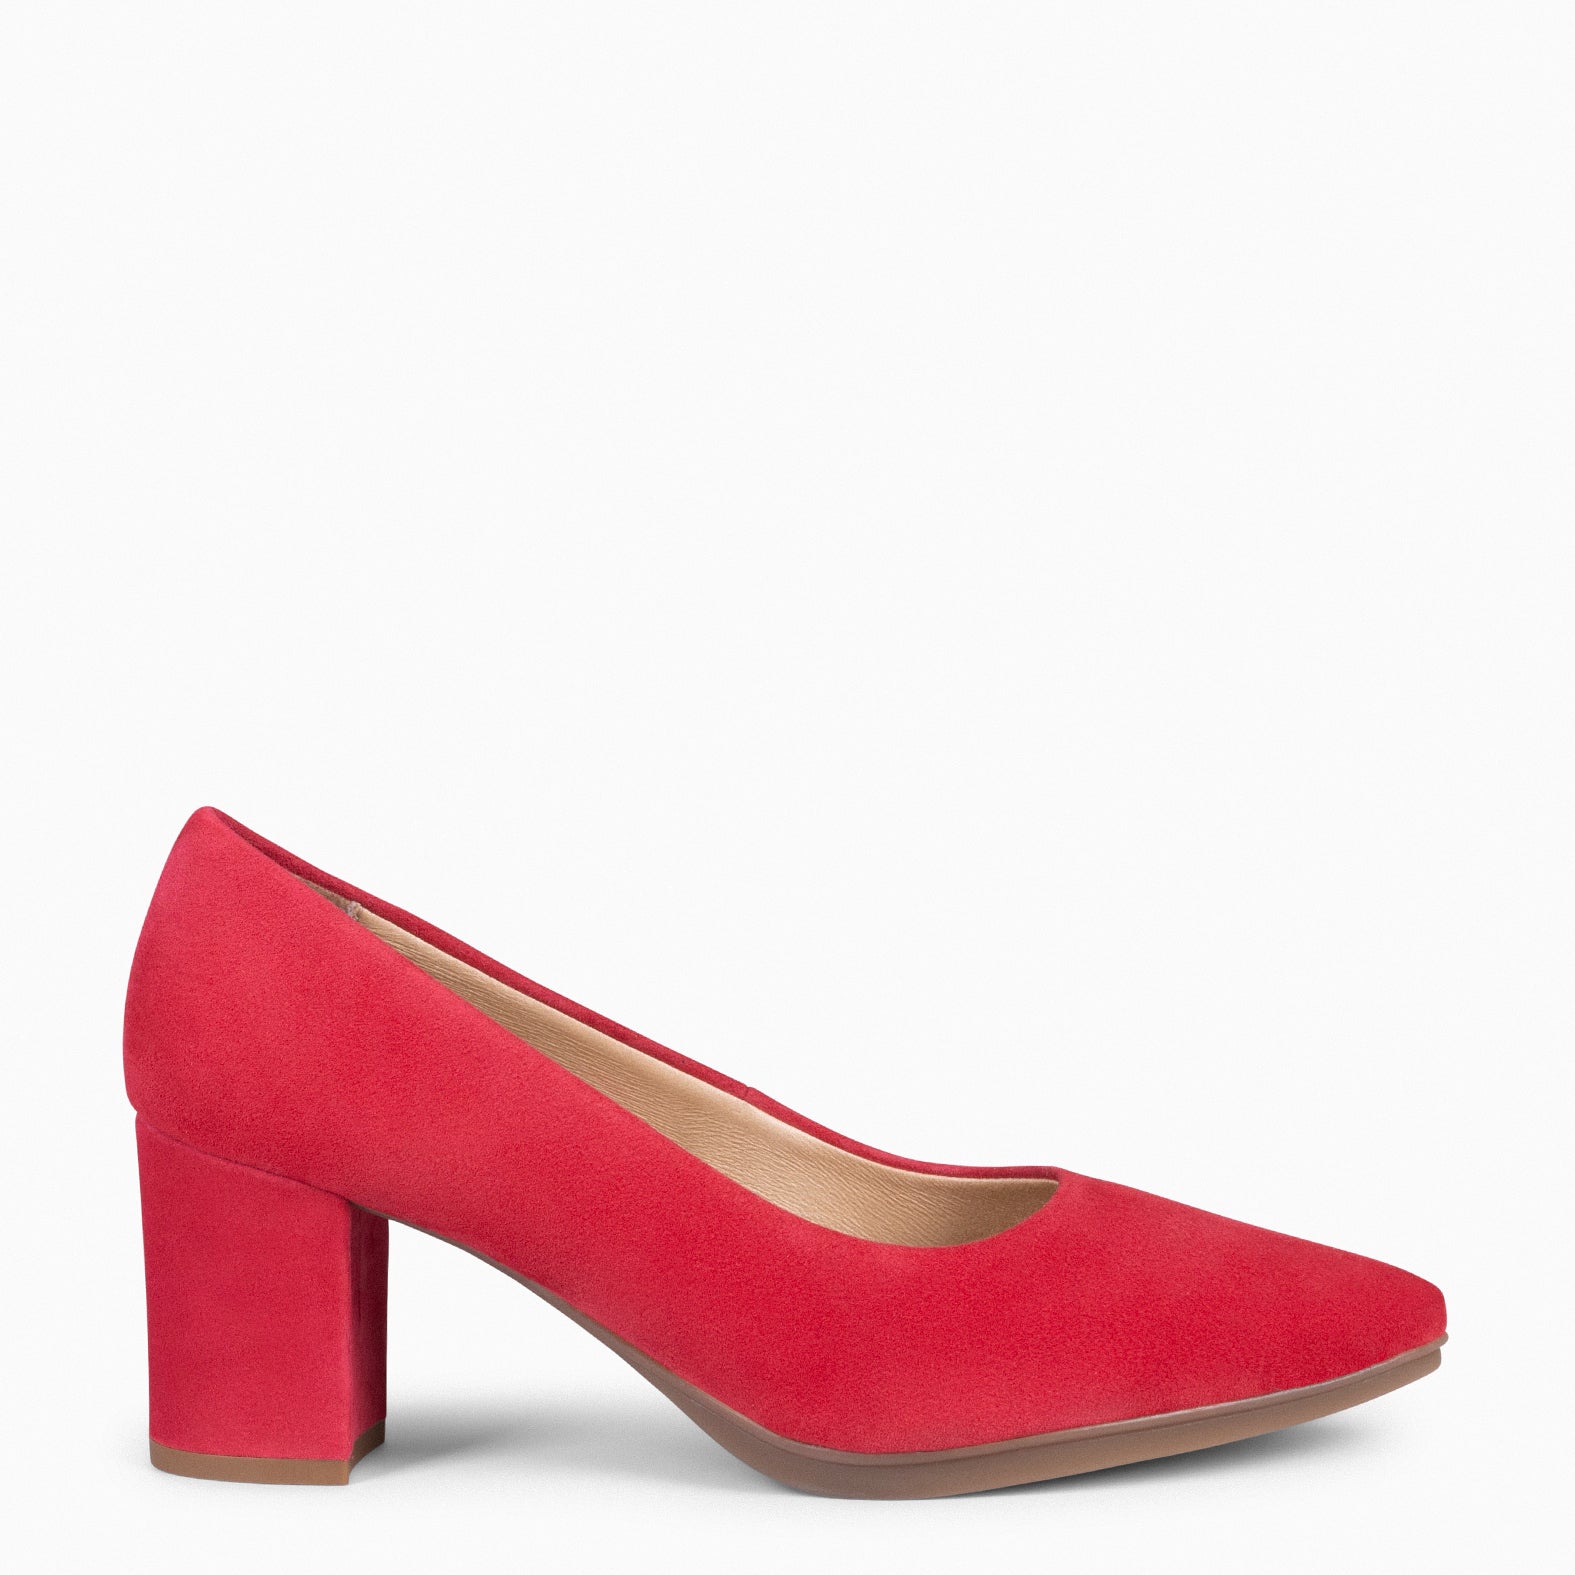 URBAN S – RED Suede Mid-Heeled Shoes 